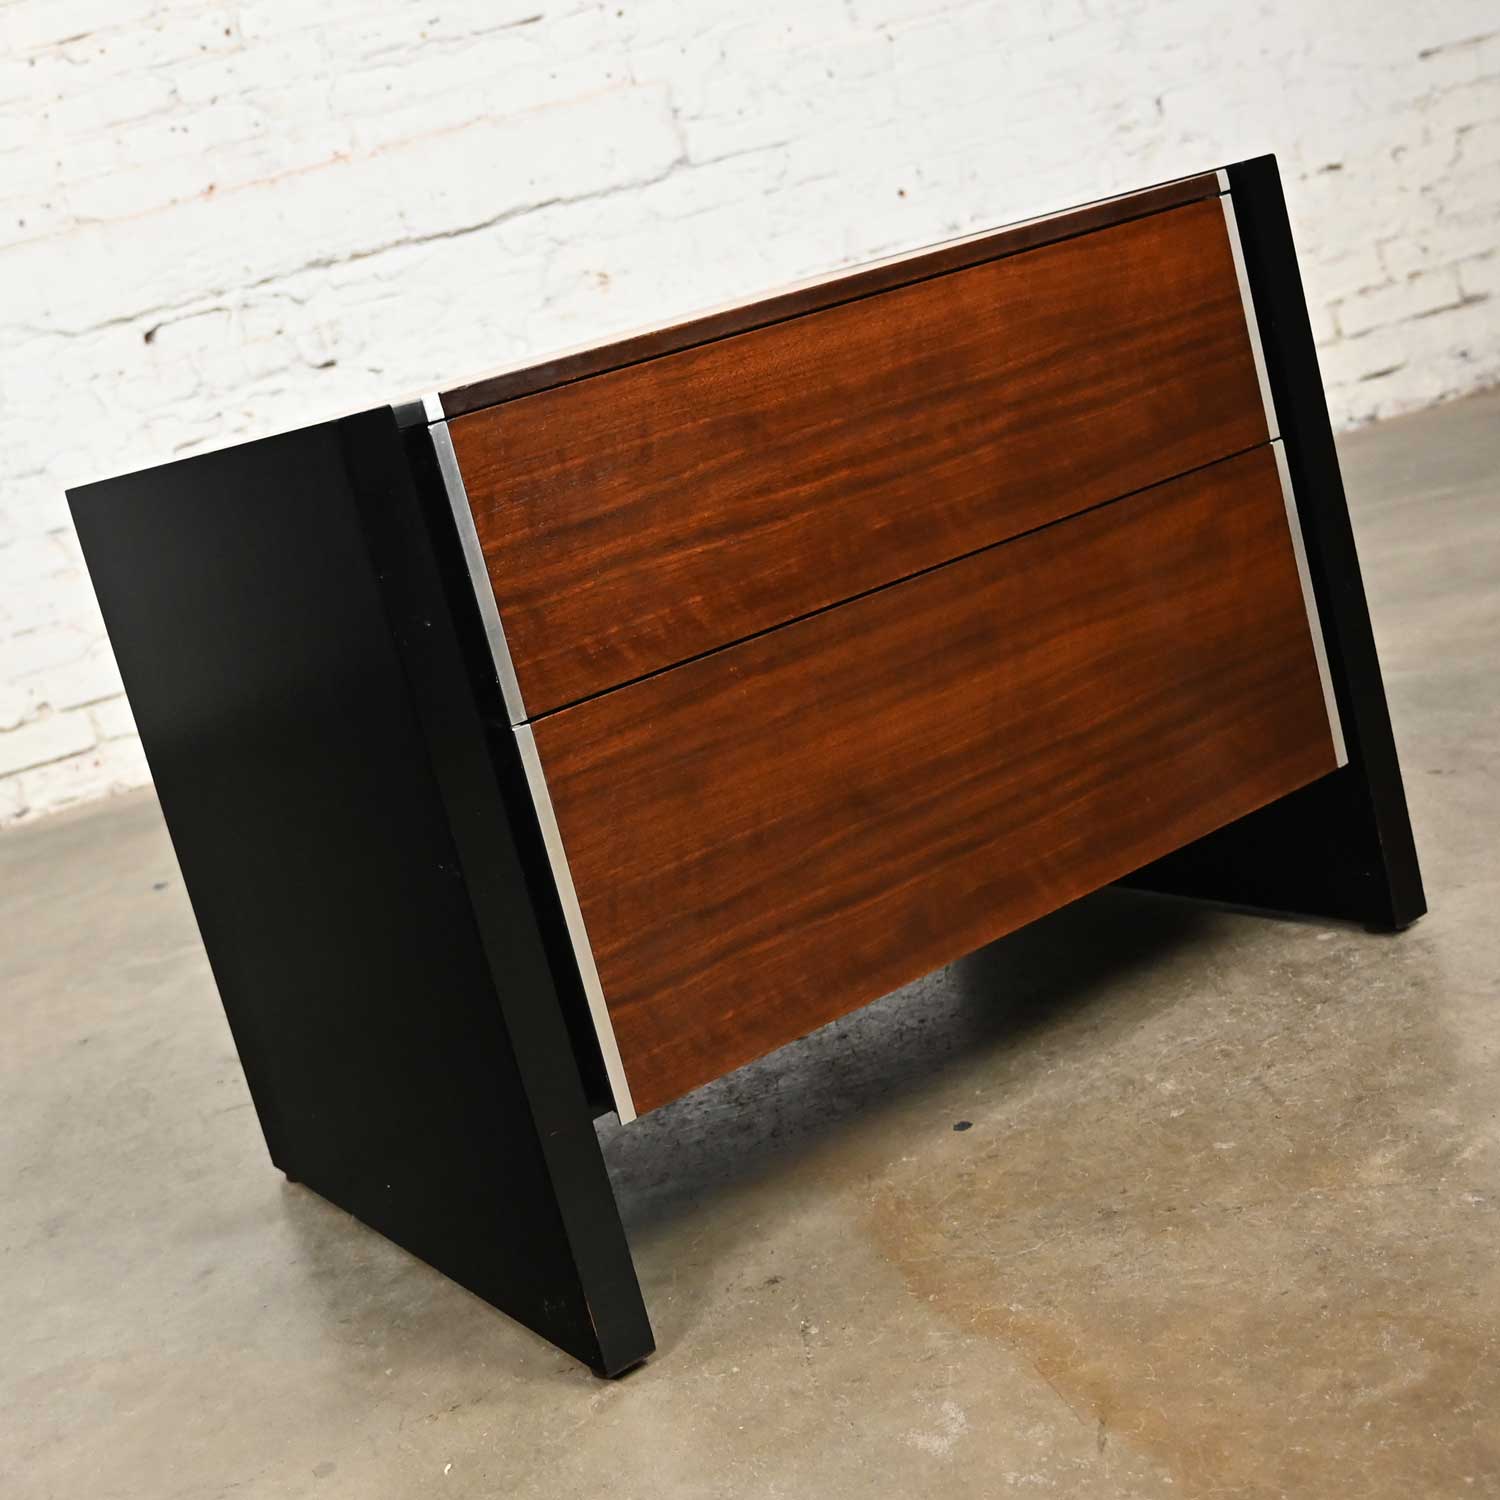 Vintage Mid-Century Modern Rosewood Nightstand or End Table by Glenn of California